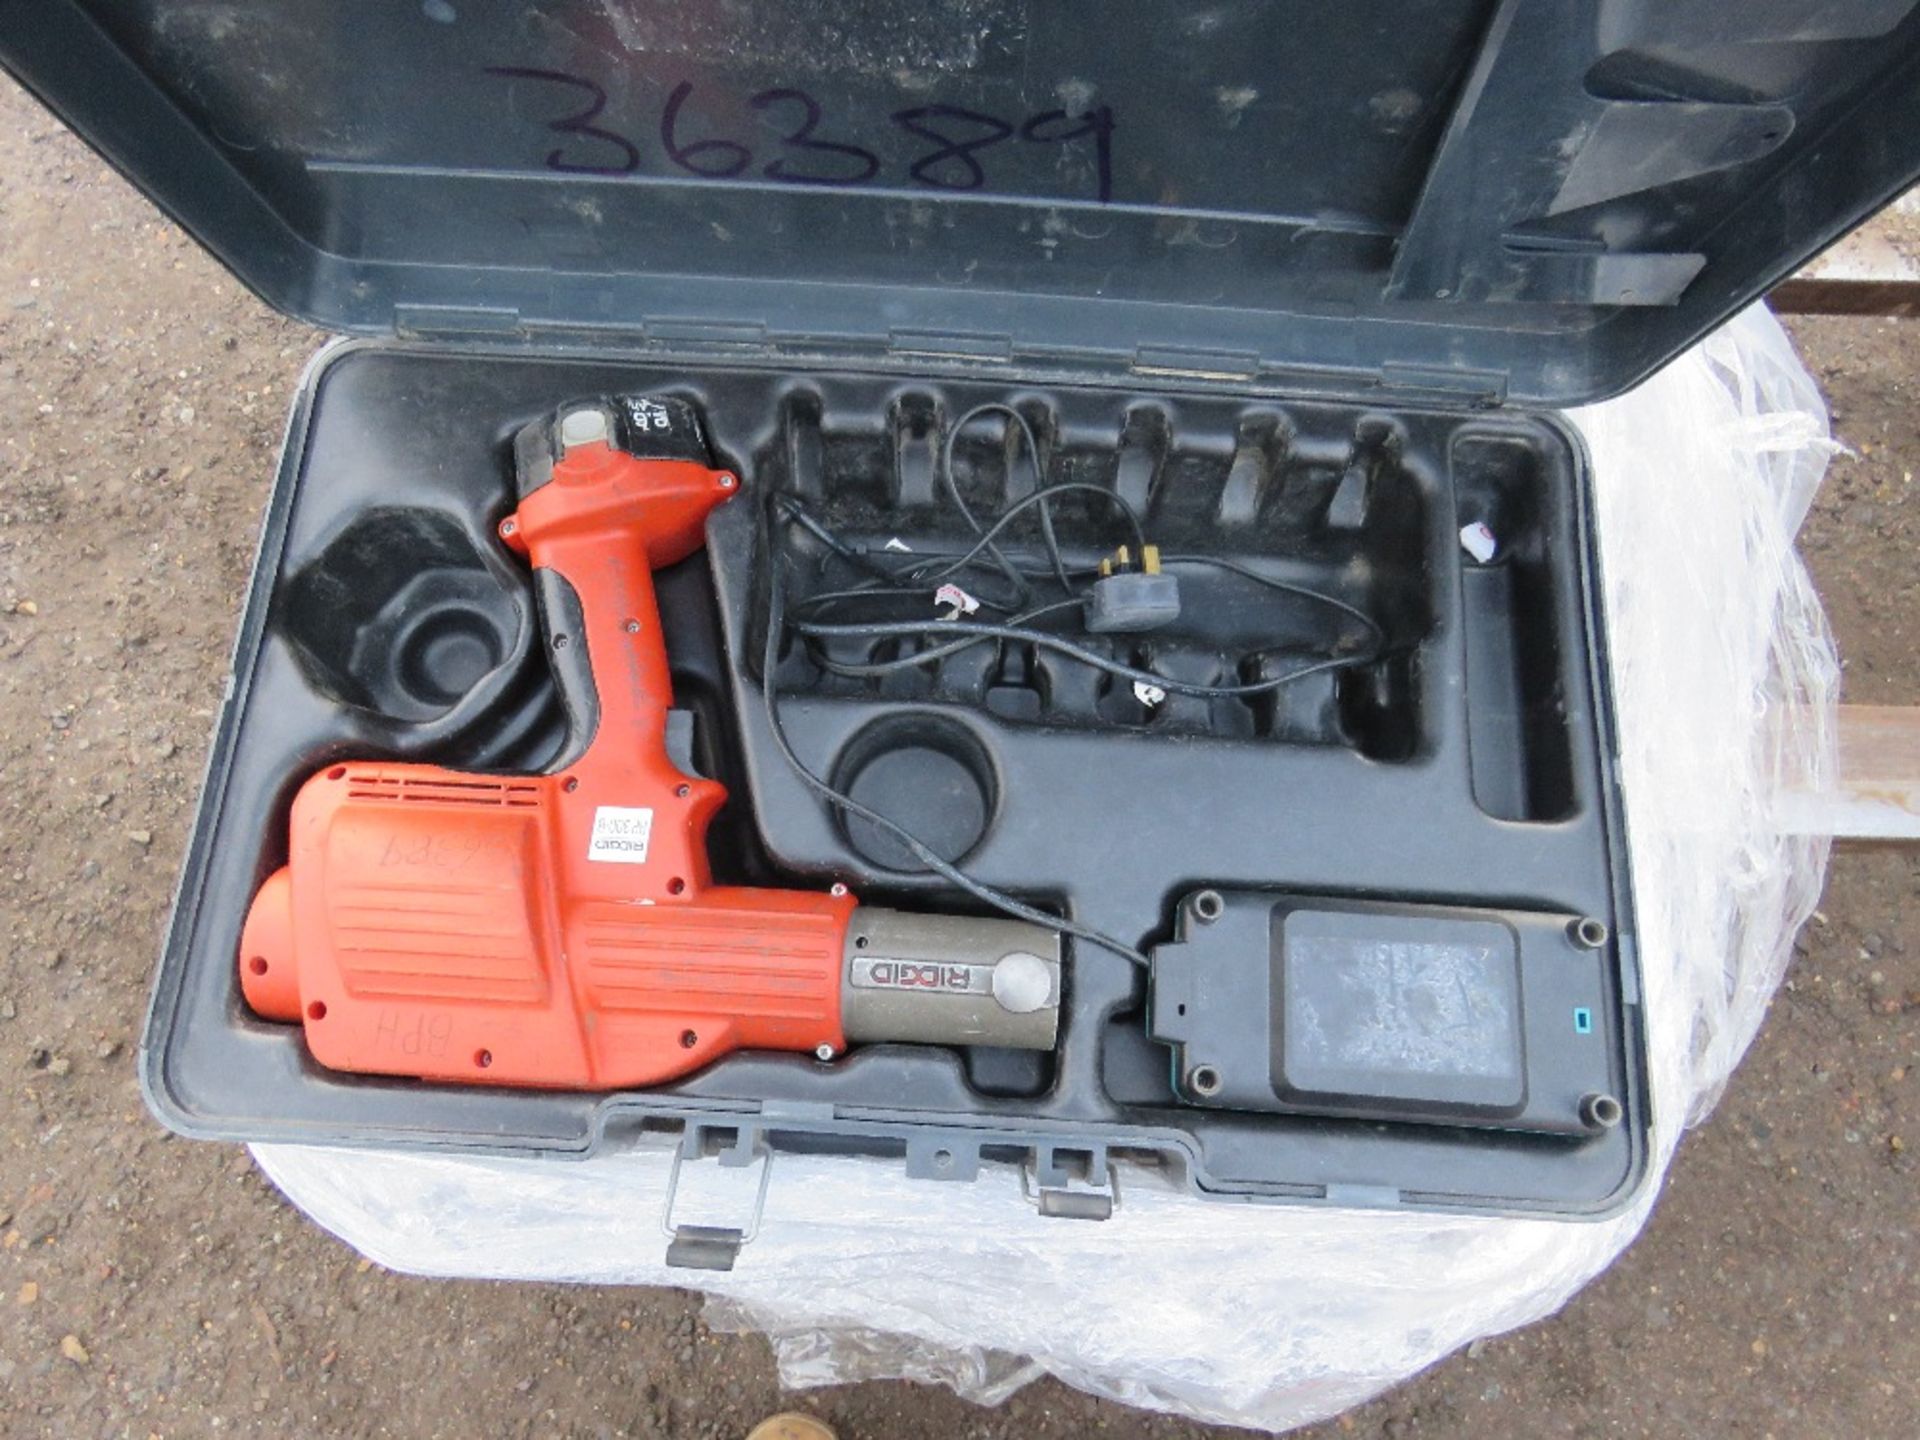 PALLET CONTAINING 6 X RIDGID RP300-B BATTERY POWERED CRIMPING UNITS. BOXES CONTAIN THE GUN PLUS CHAR - Image 2 of 4